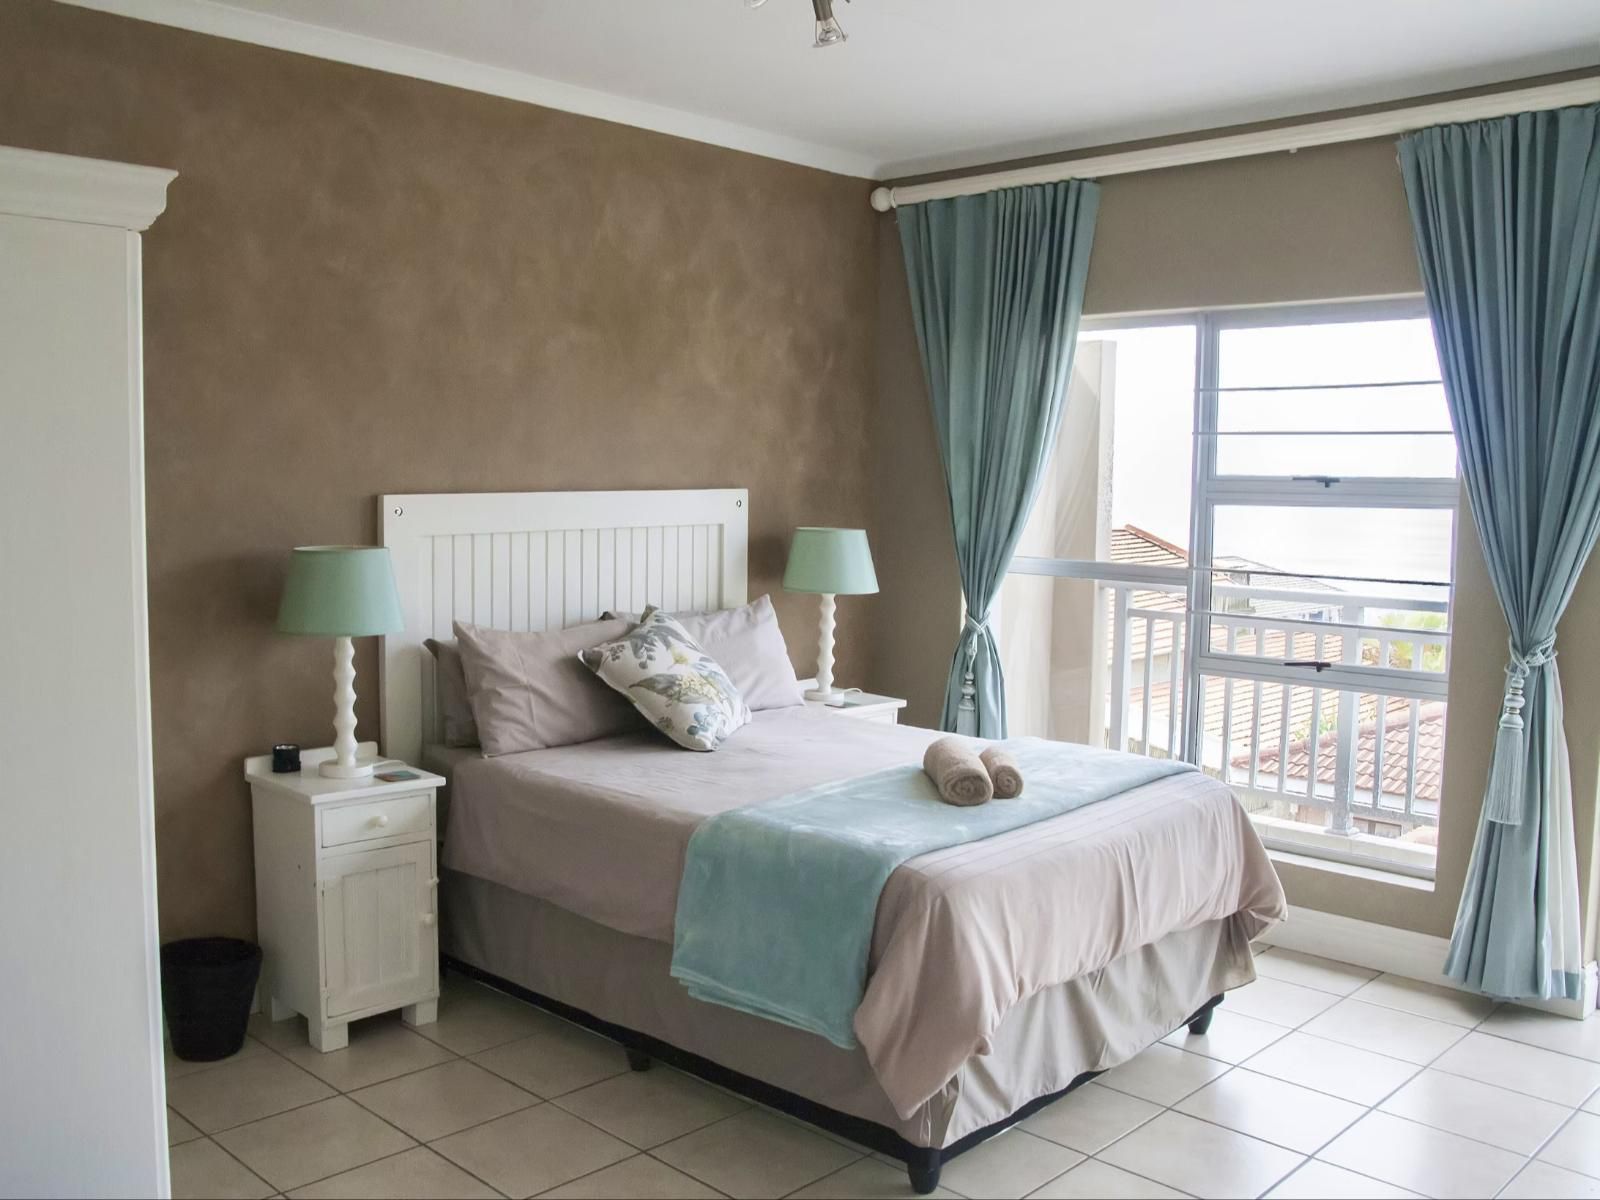 Silver Tides Seaside Accommodation Ocean View Durban Durban Kwazulu Natal South Africa Unsaturated, Bedroom